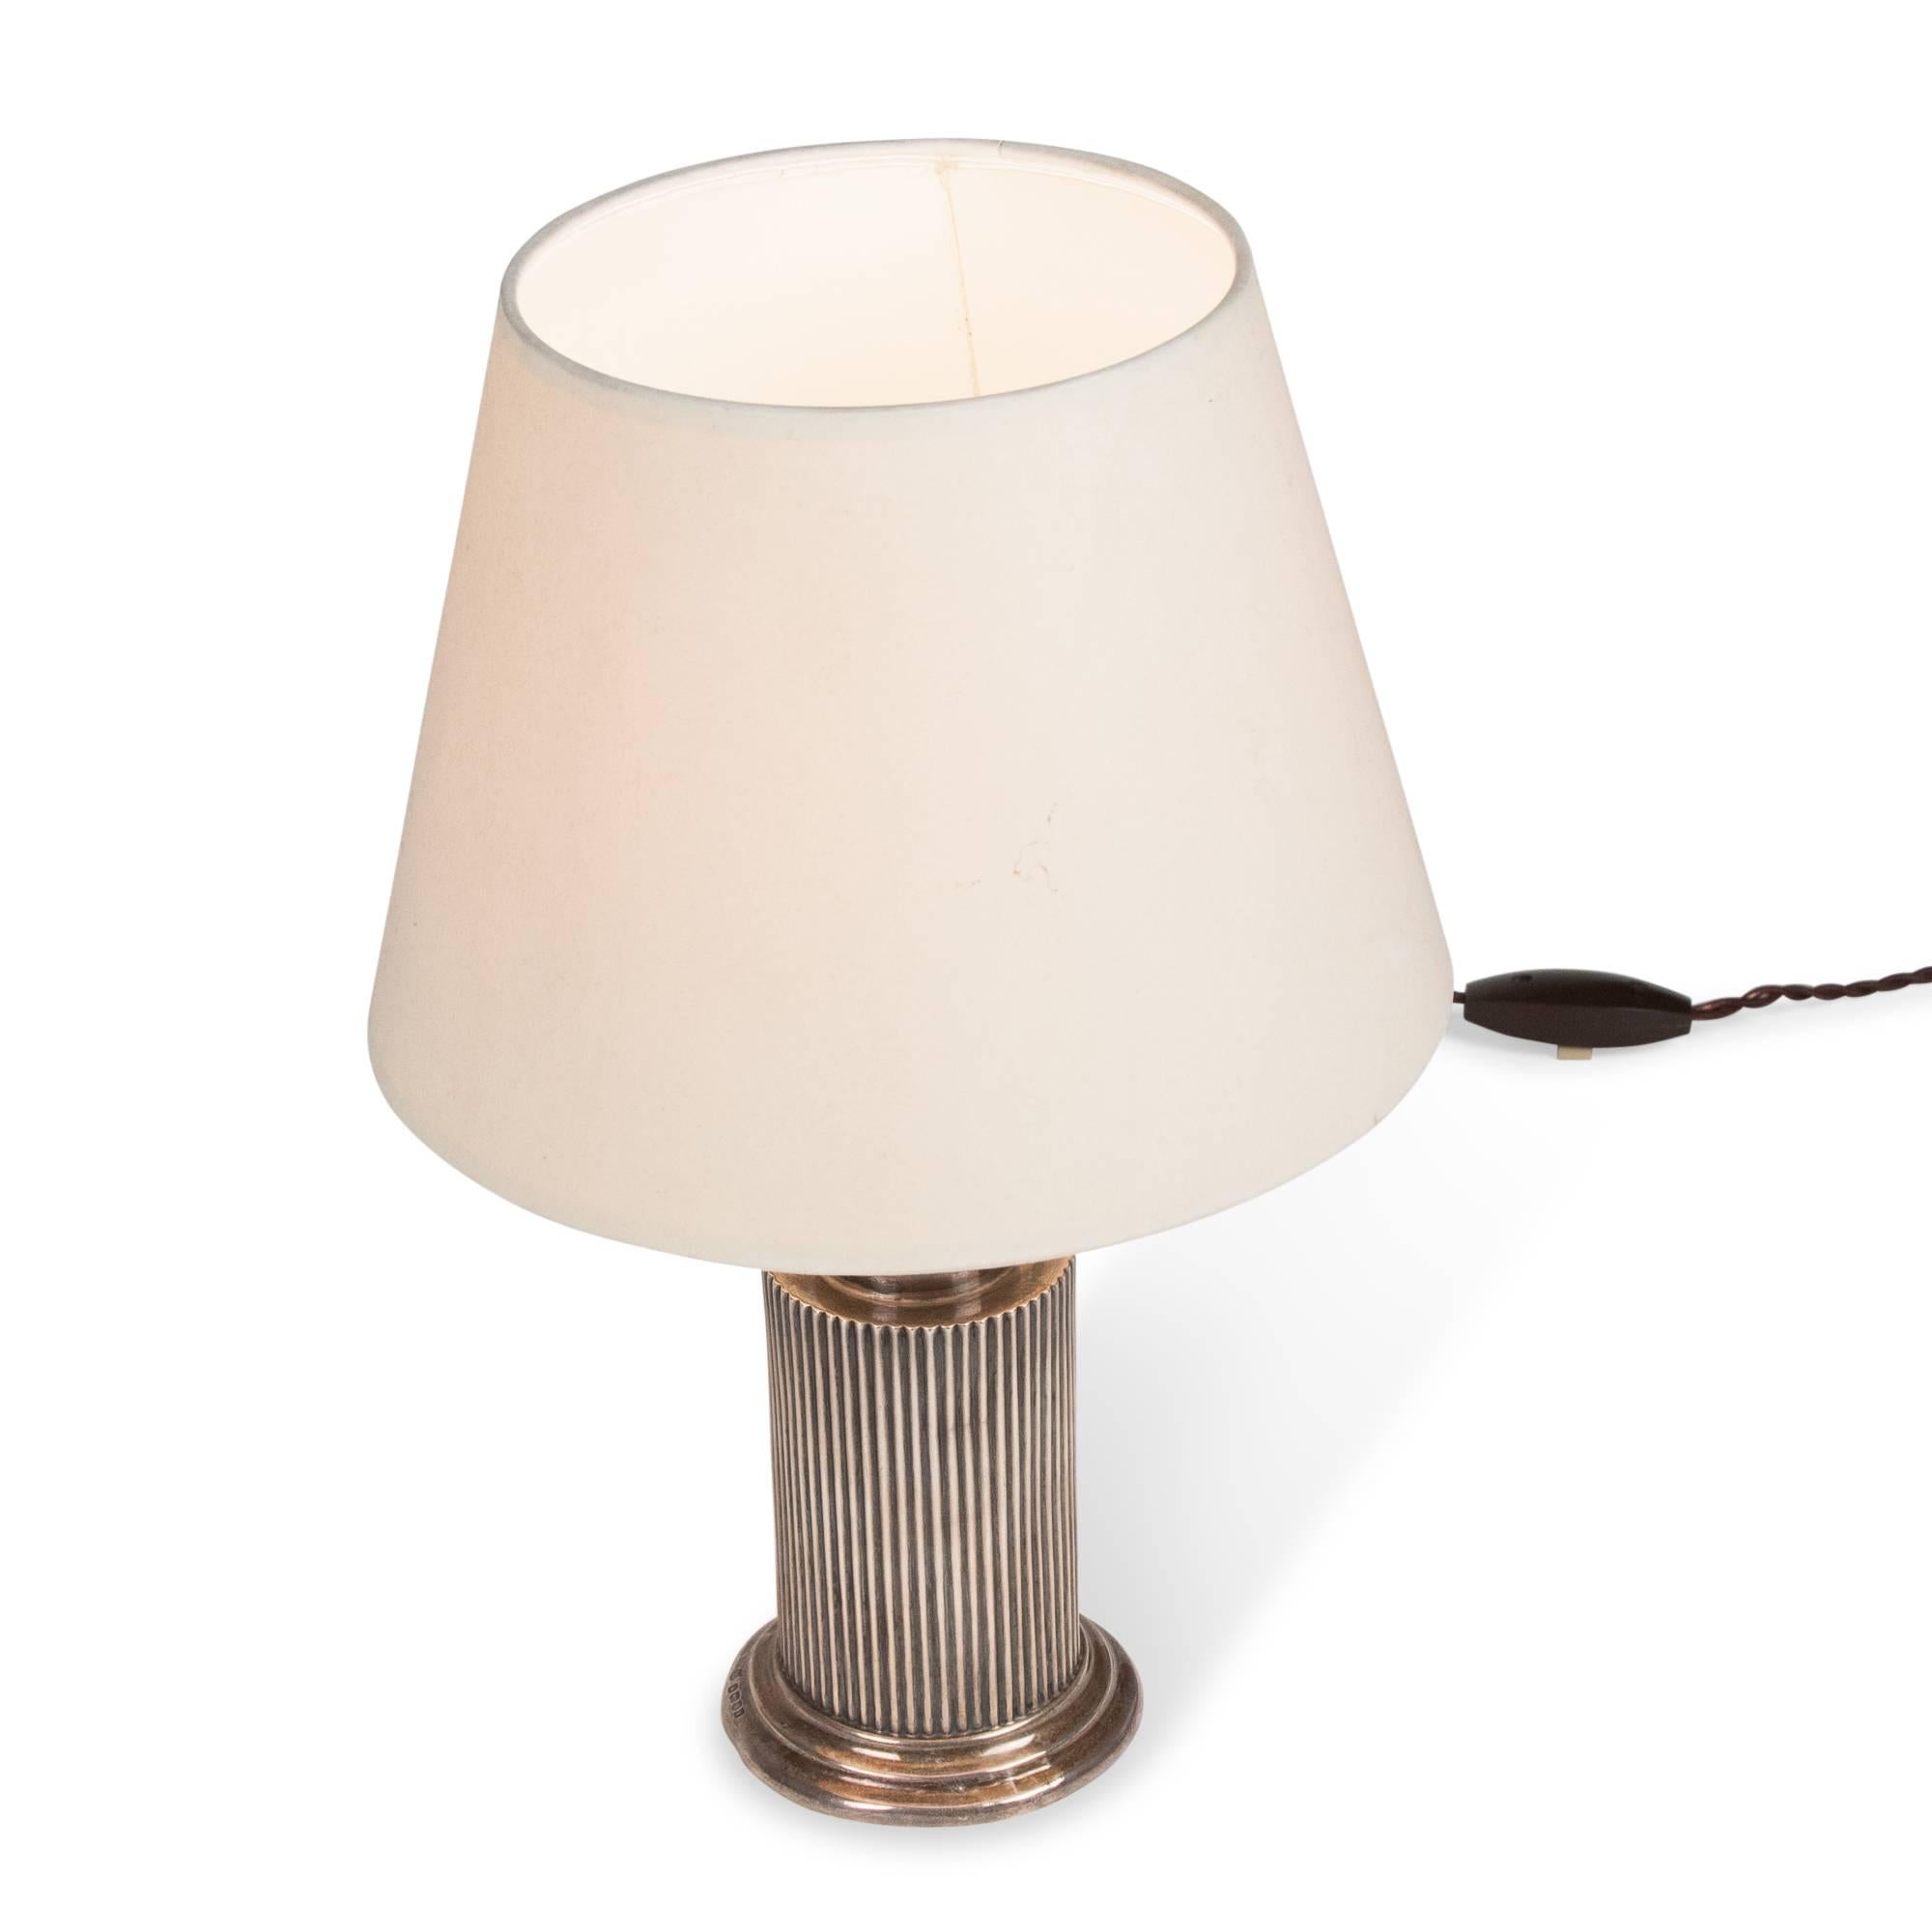 Silver plate small table lamp, a simple fluted cylindrical column with stepped base, France, 1930s. Measures: Overall height 12 1/4 in. Shade measures top diameter 5 in, bottom diameter 7 1/2 in, shade height 6 1/2. Base is 3 1/4 in diameter. (Item